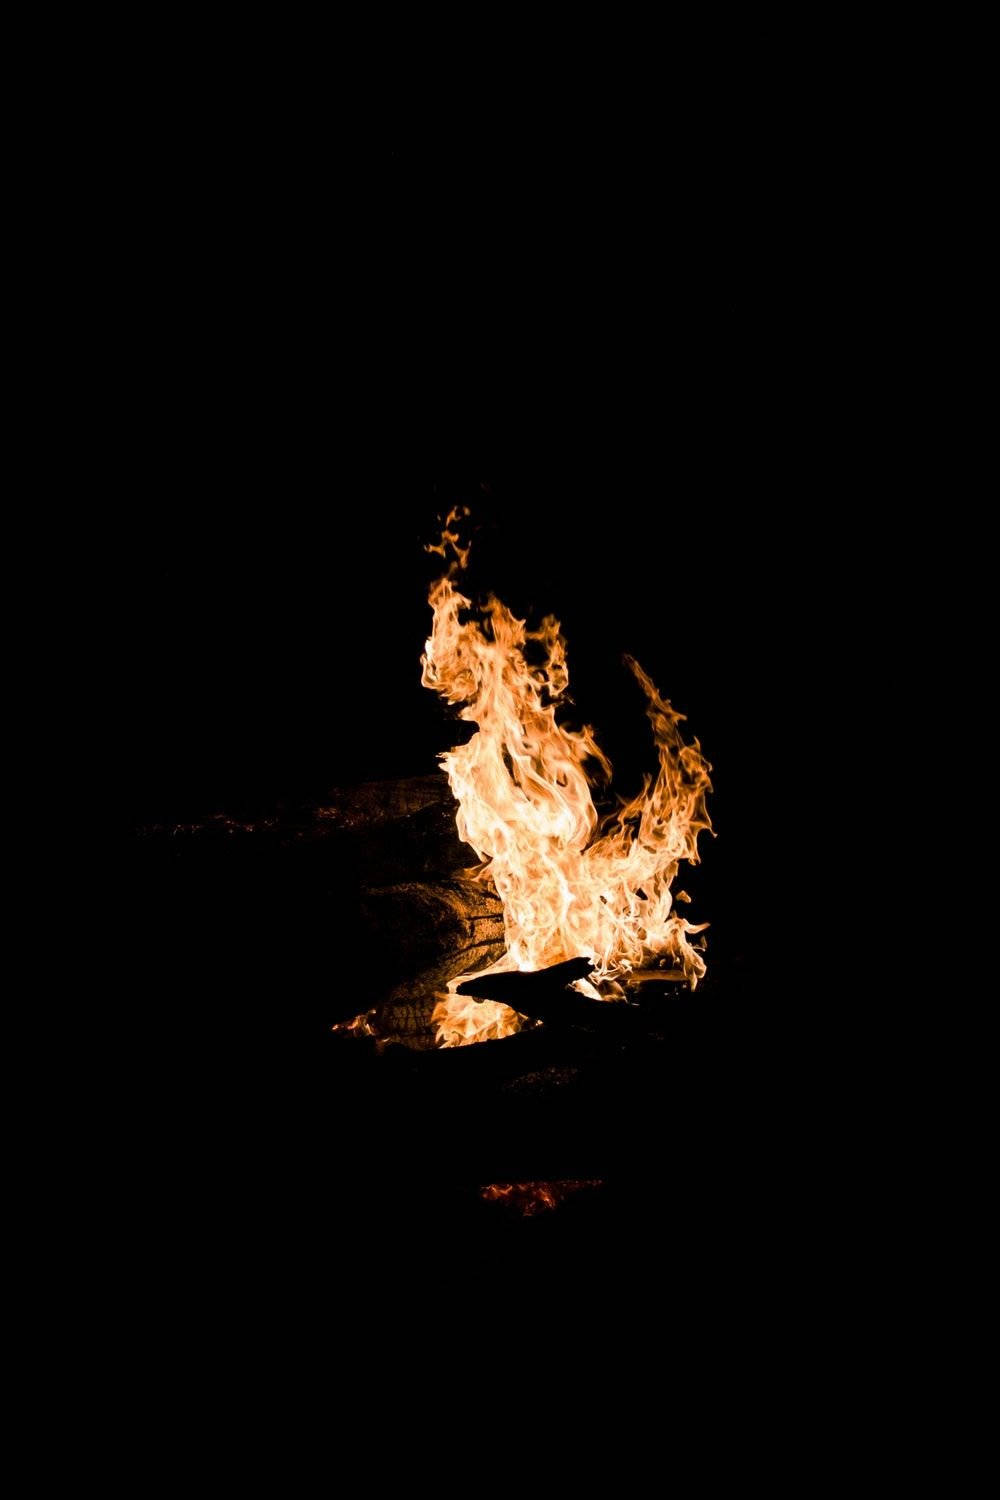 Burning Fire Oled Iphone Wallpaper